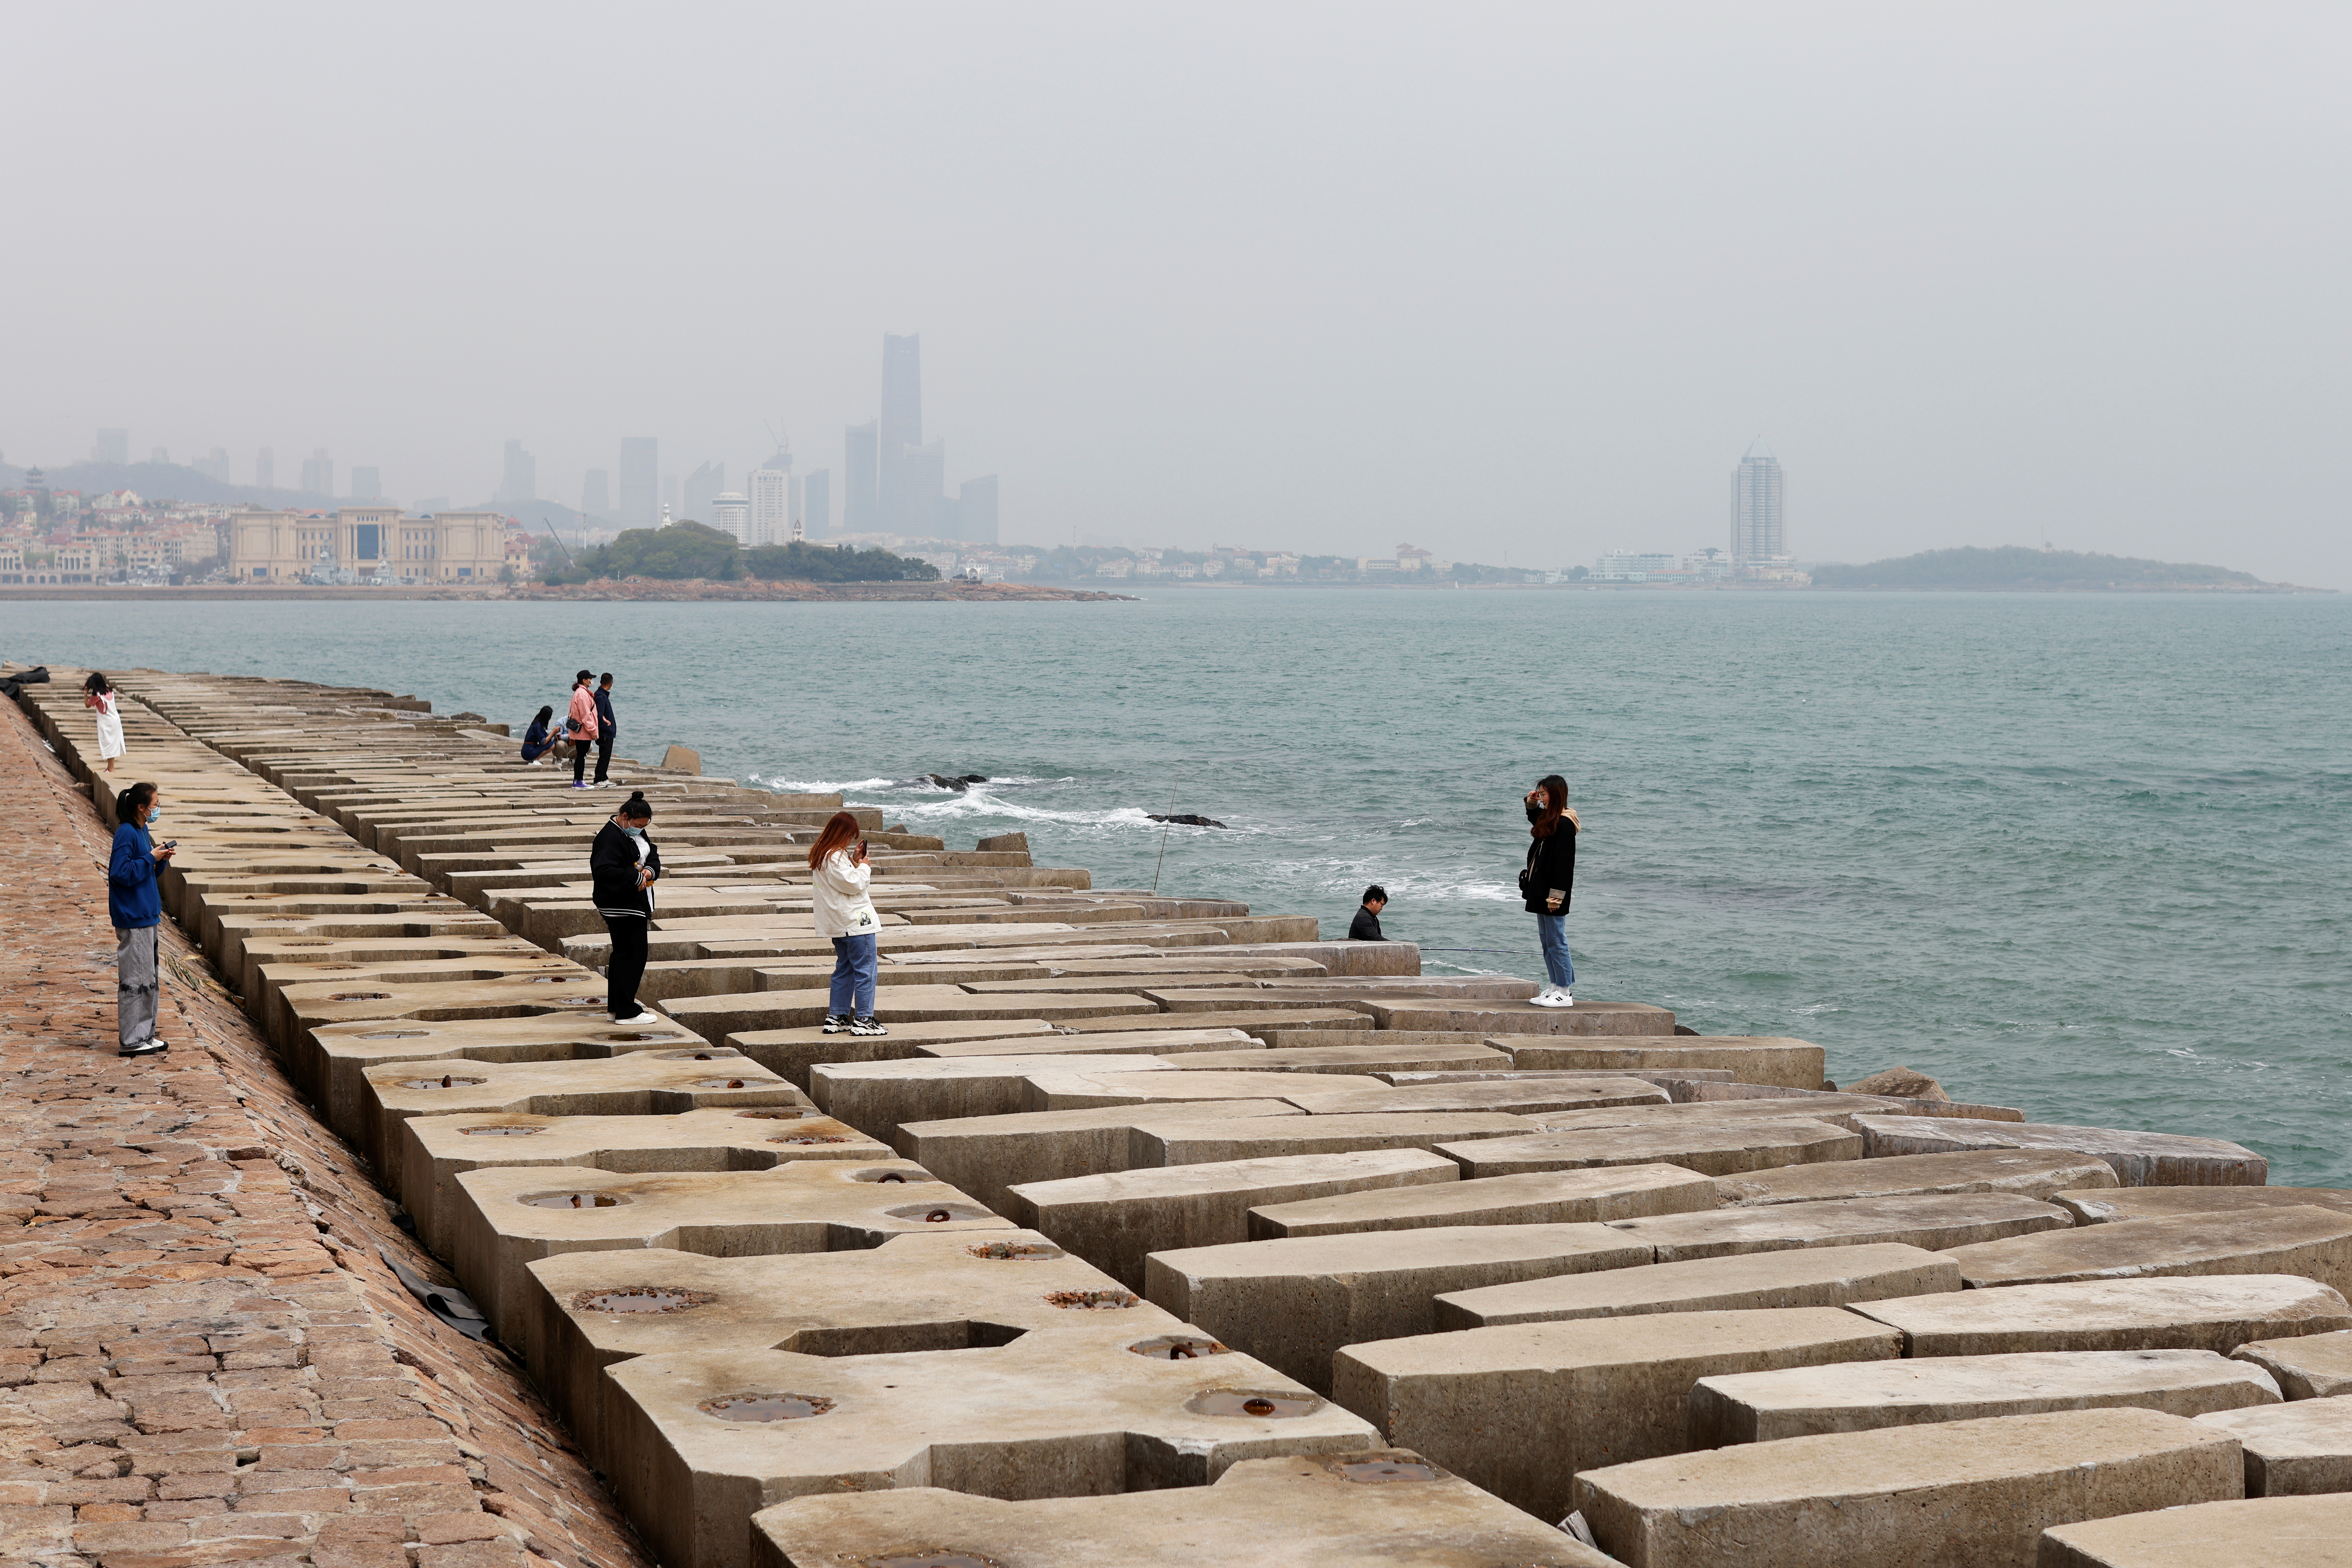 Visitor poses for pictures on the coast of Qingdao